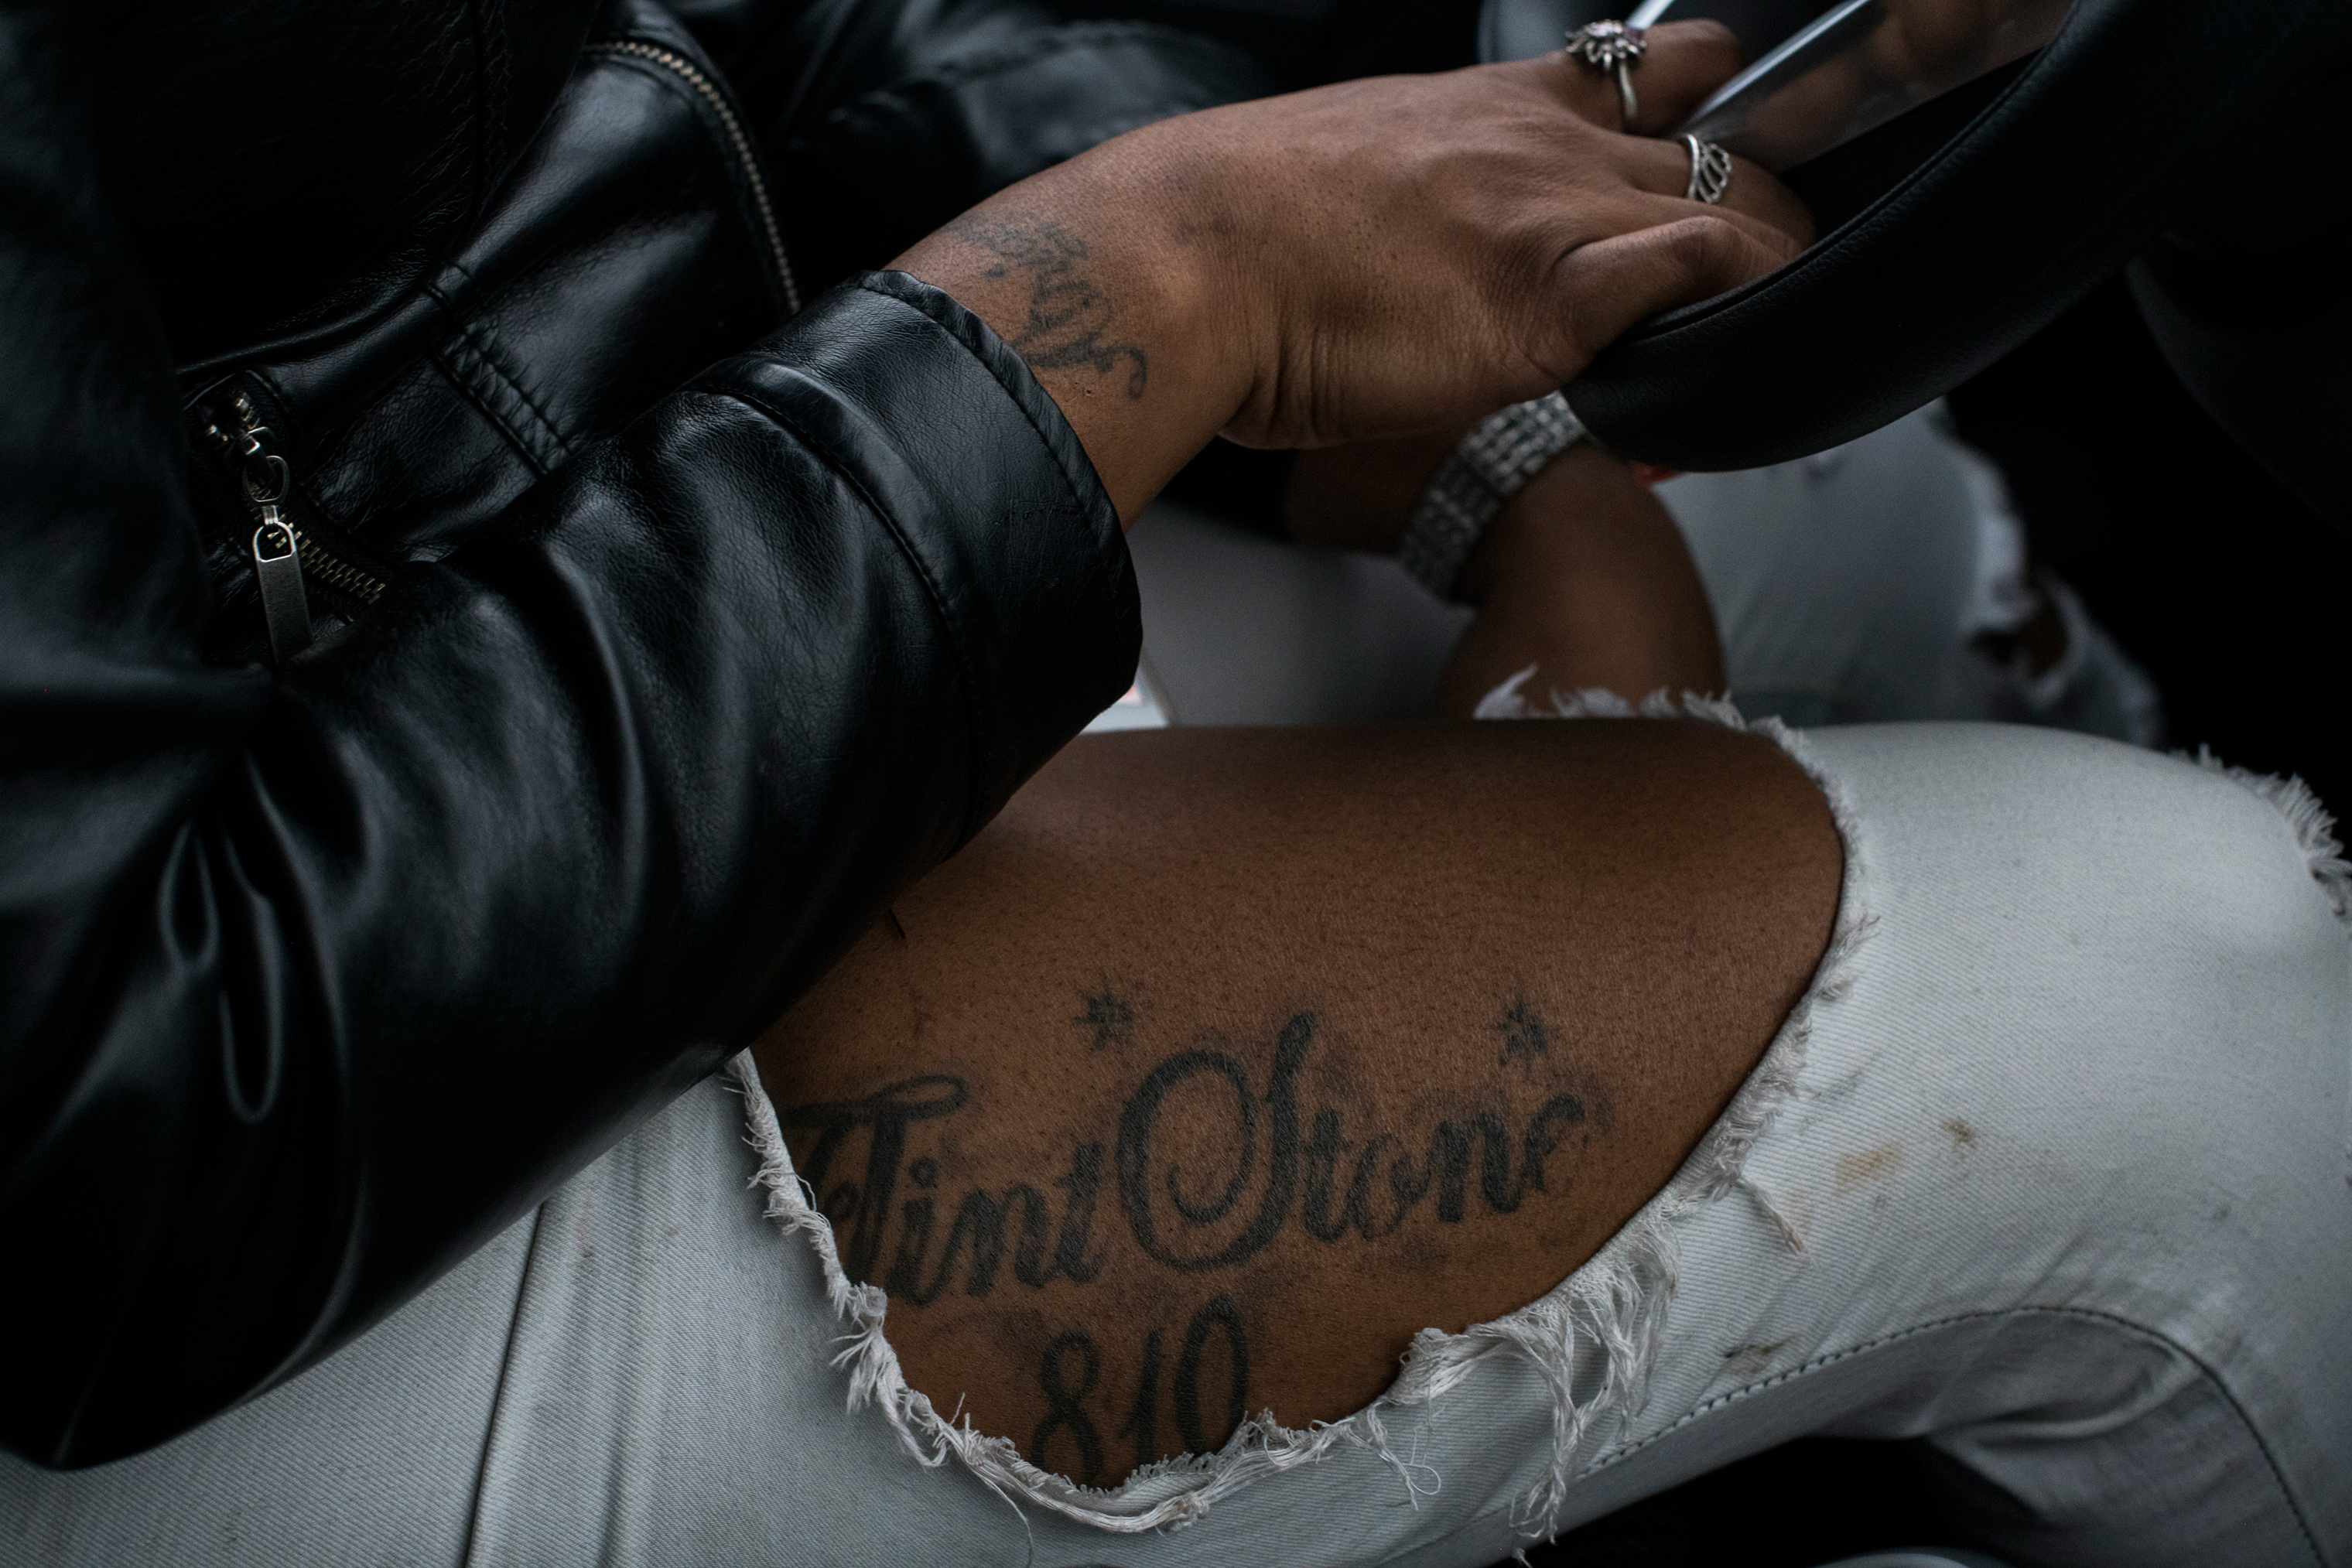 Hawk's "Flint Stone" tattoo, a name many devout natives call themselves, is seen as she drives in February. (Brittany Greeson for TIME)